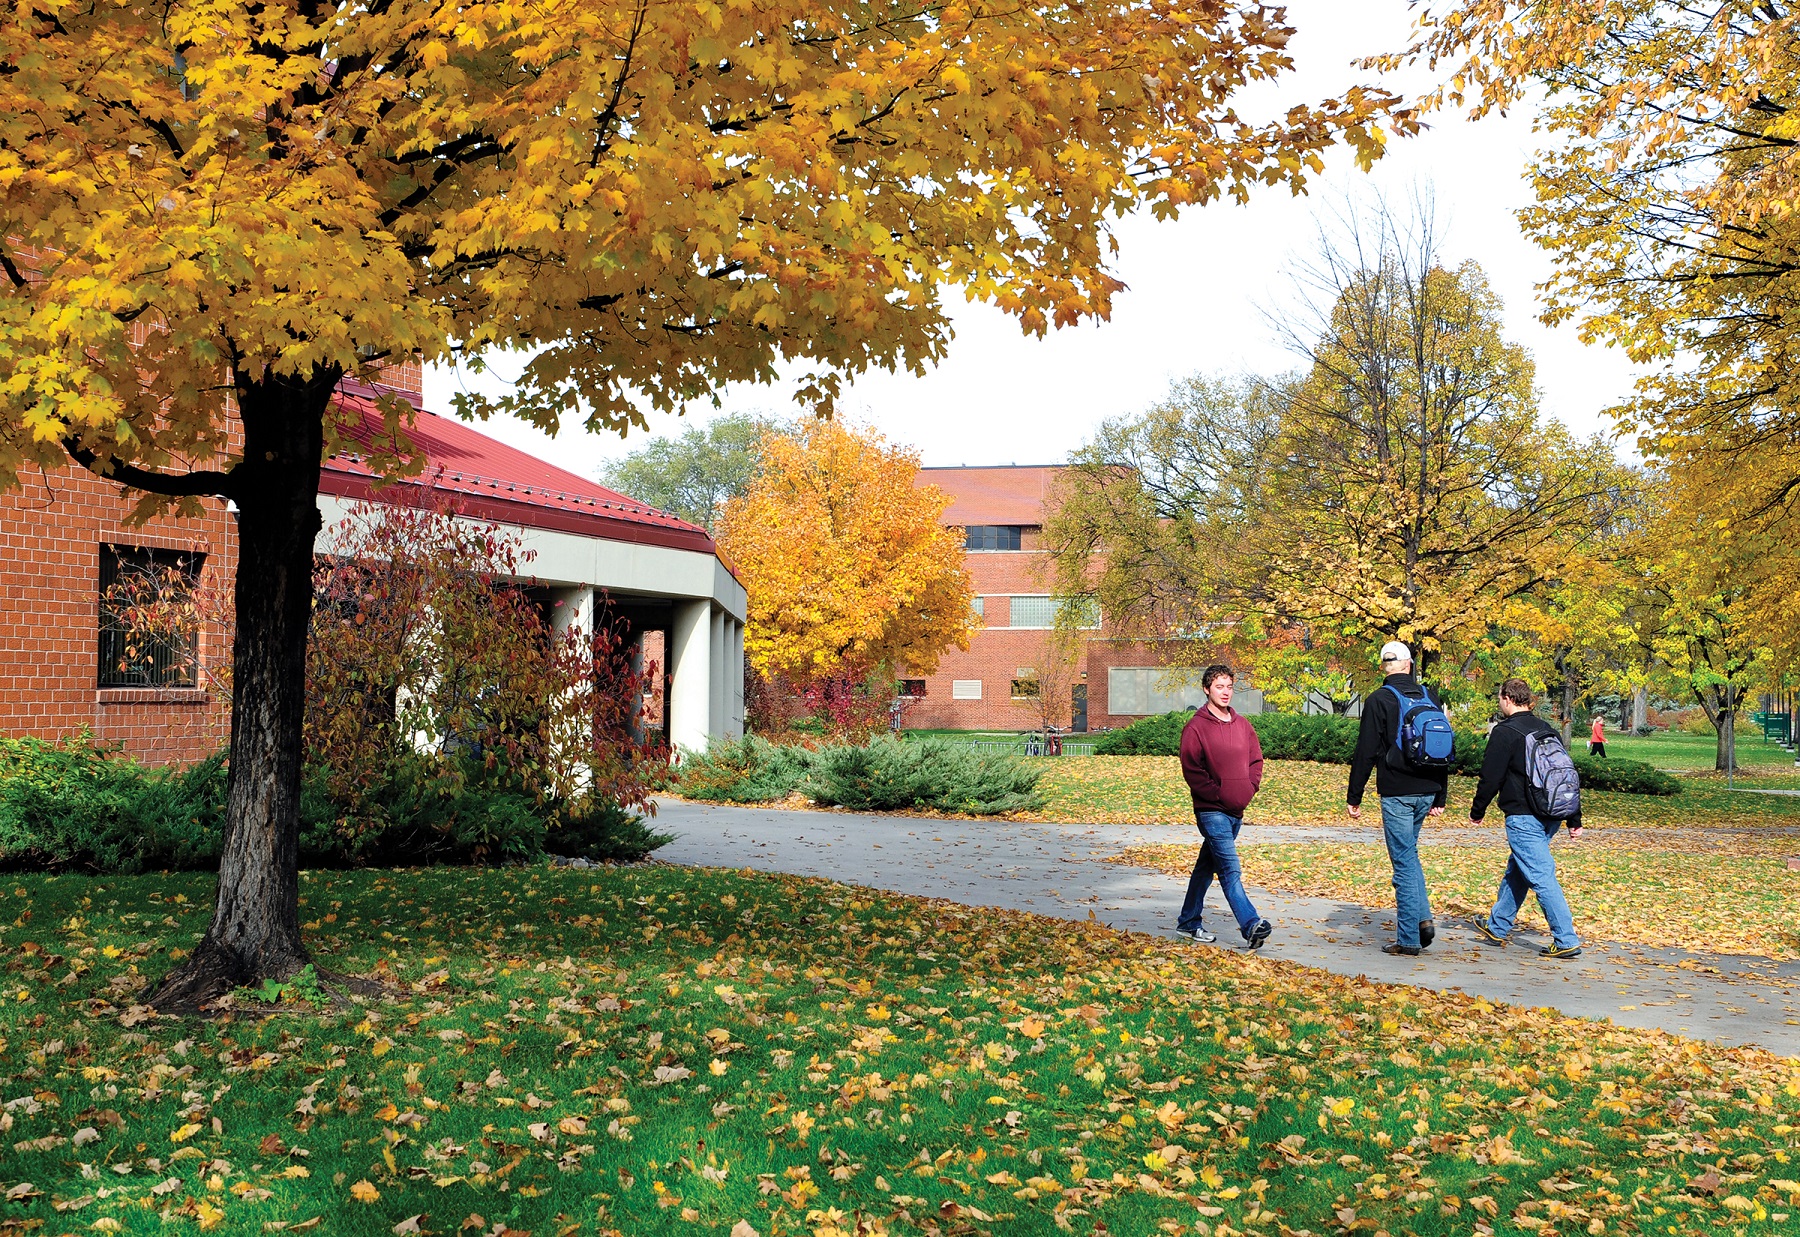 10/27/16 – Students walking outside on campus near Quentin Burdick Center.